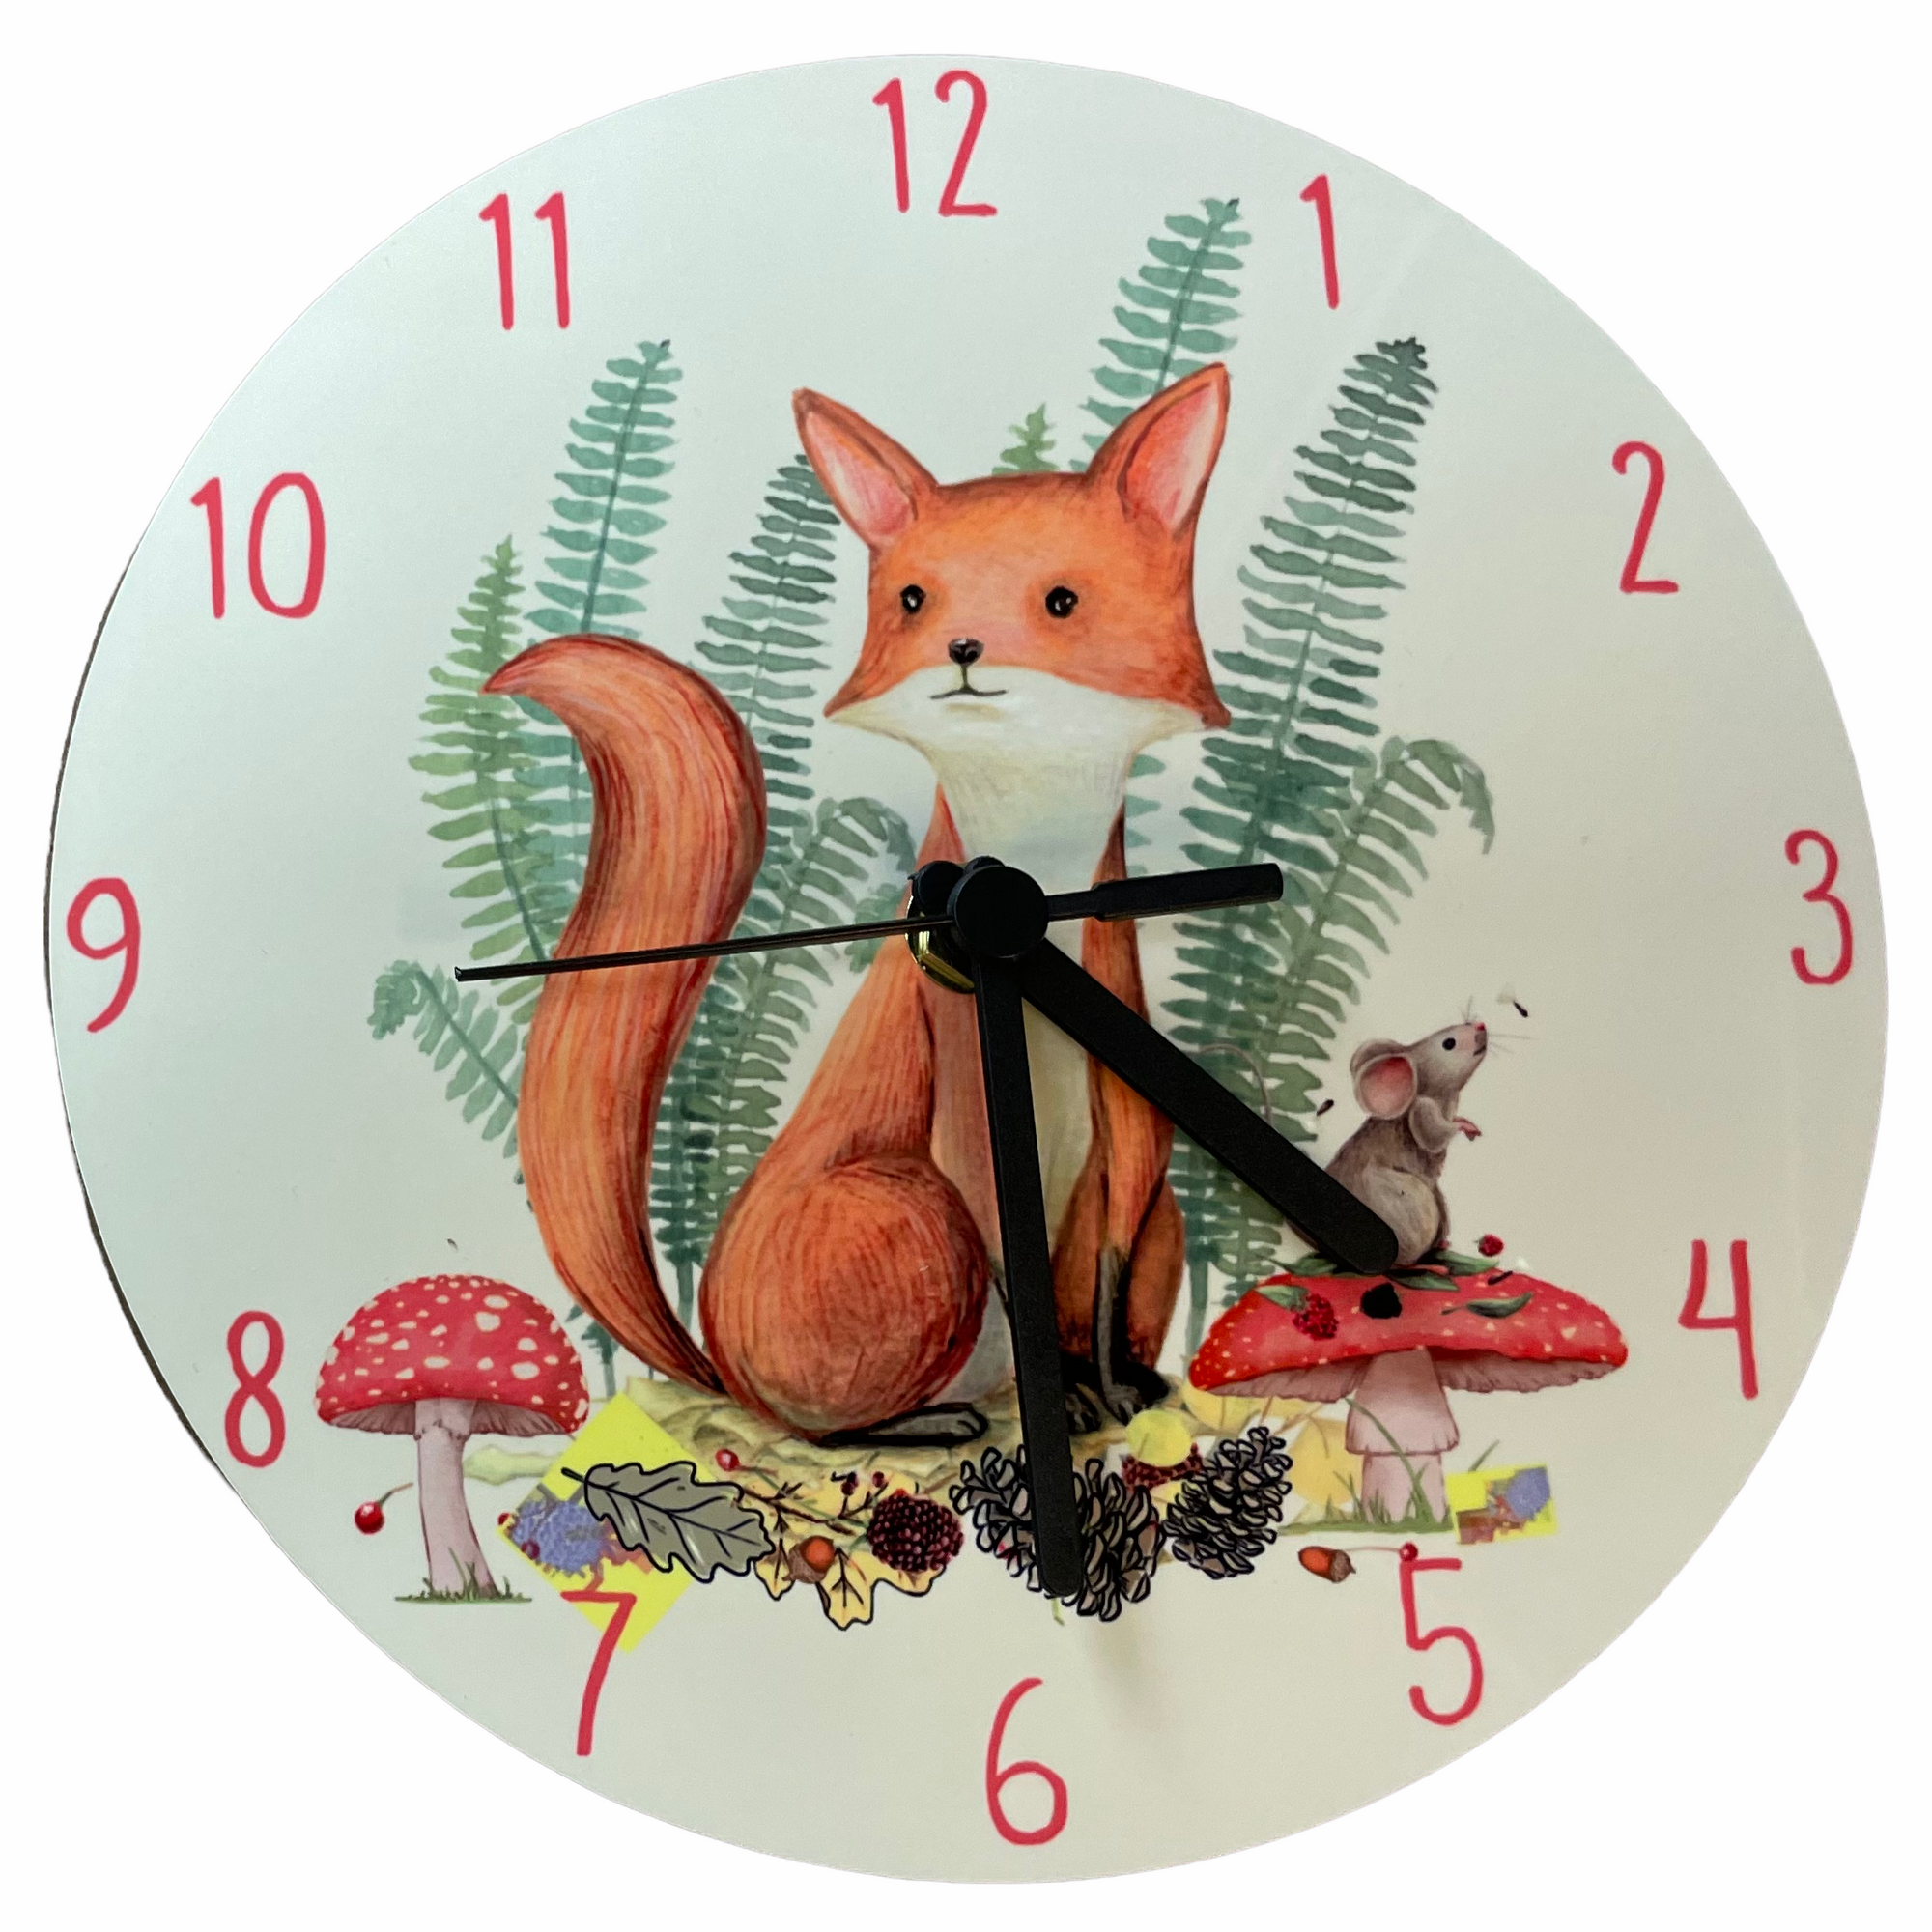 Nature themed childrens clock for a kids bedroom or nursery witha  fox, mouse, toadstool, mushroom, pine cones and acorns with ferns on the clock face. Black hands with second hand. From Mustard and Gray